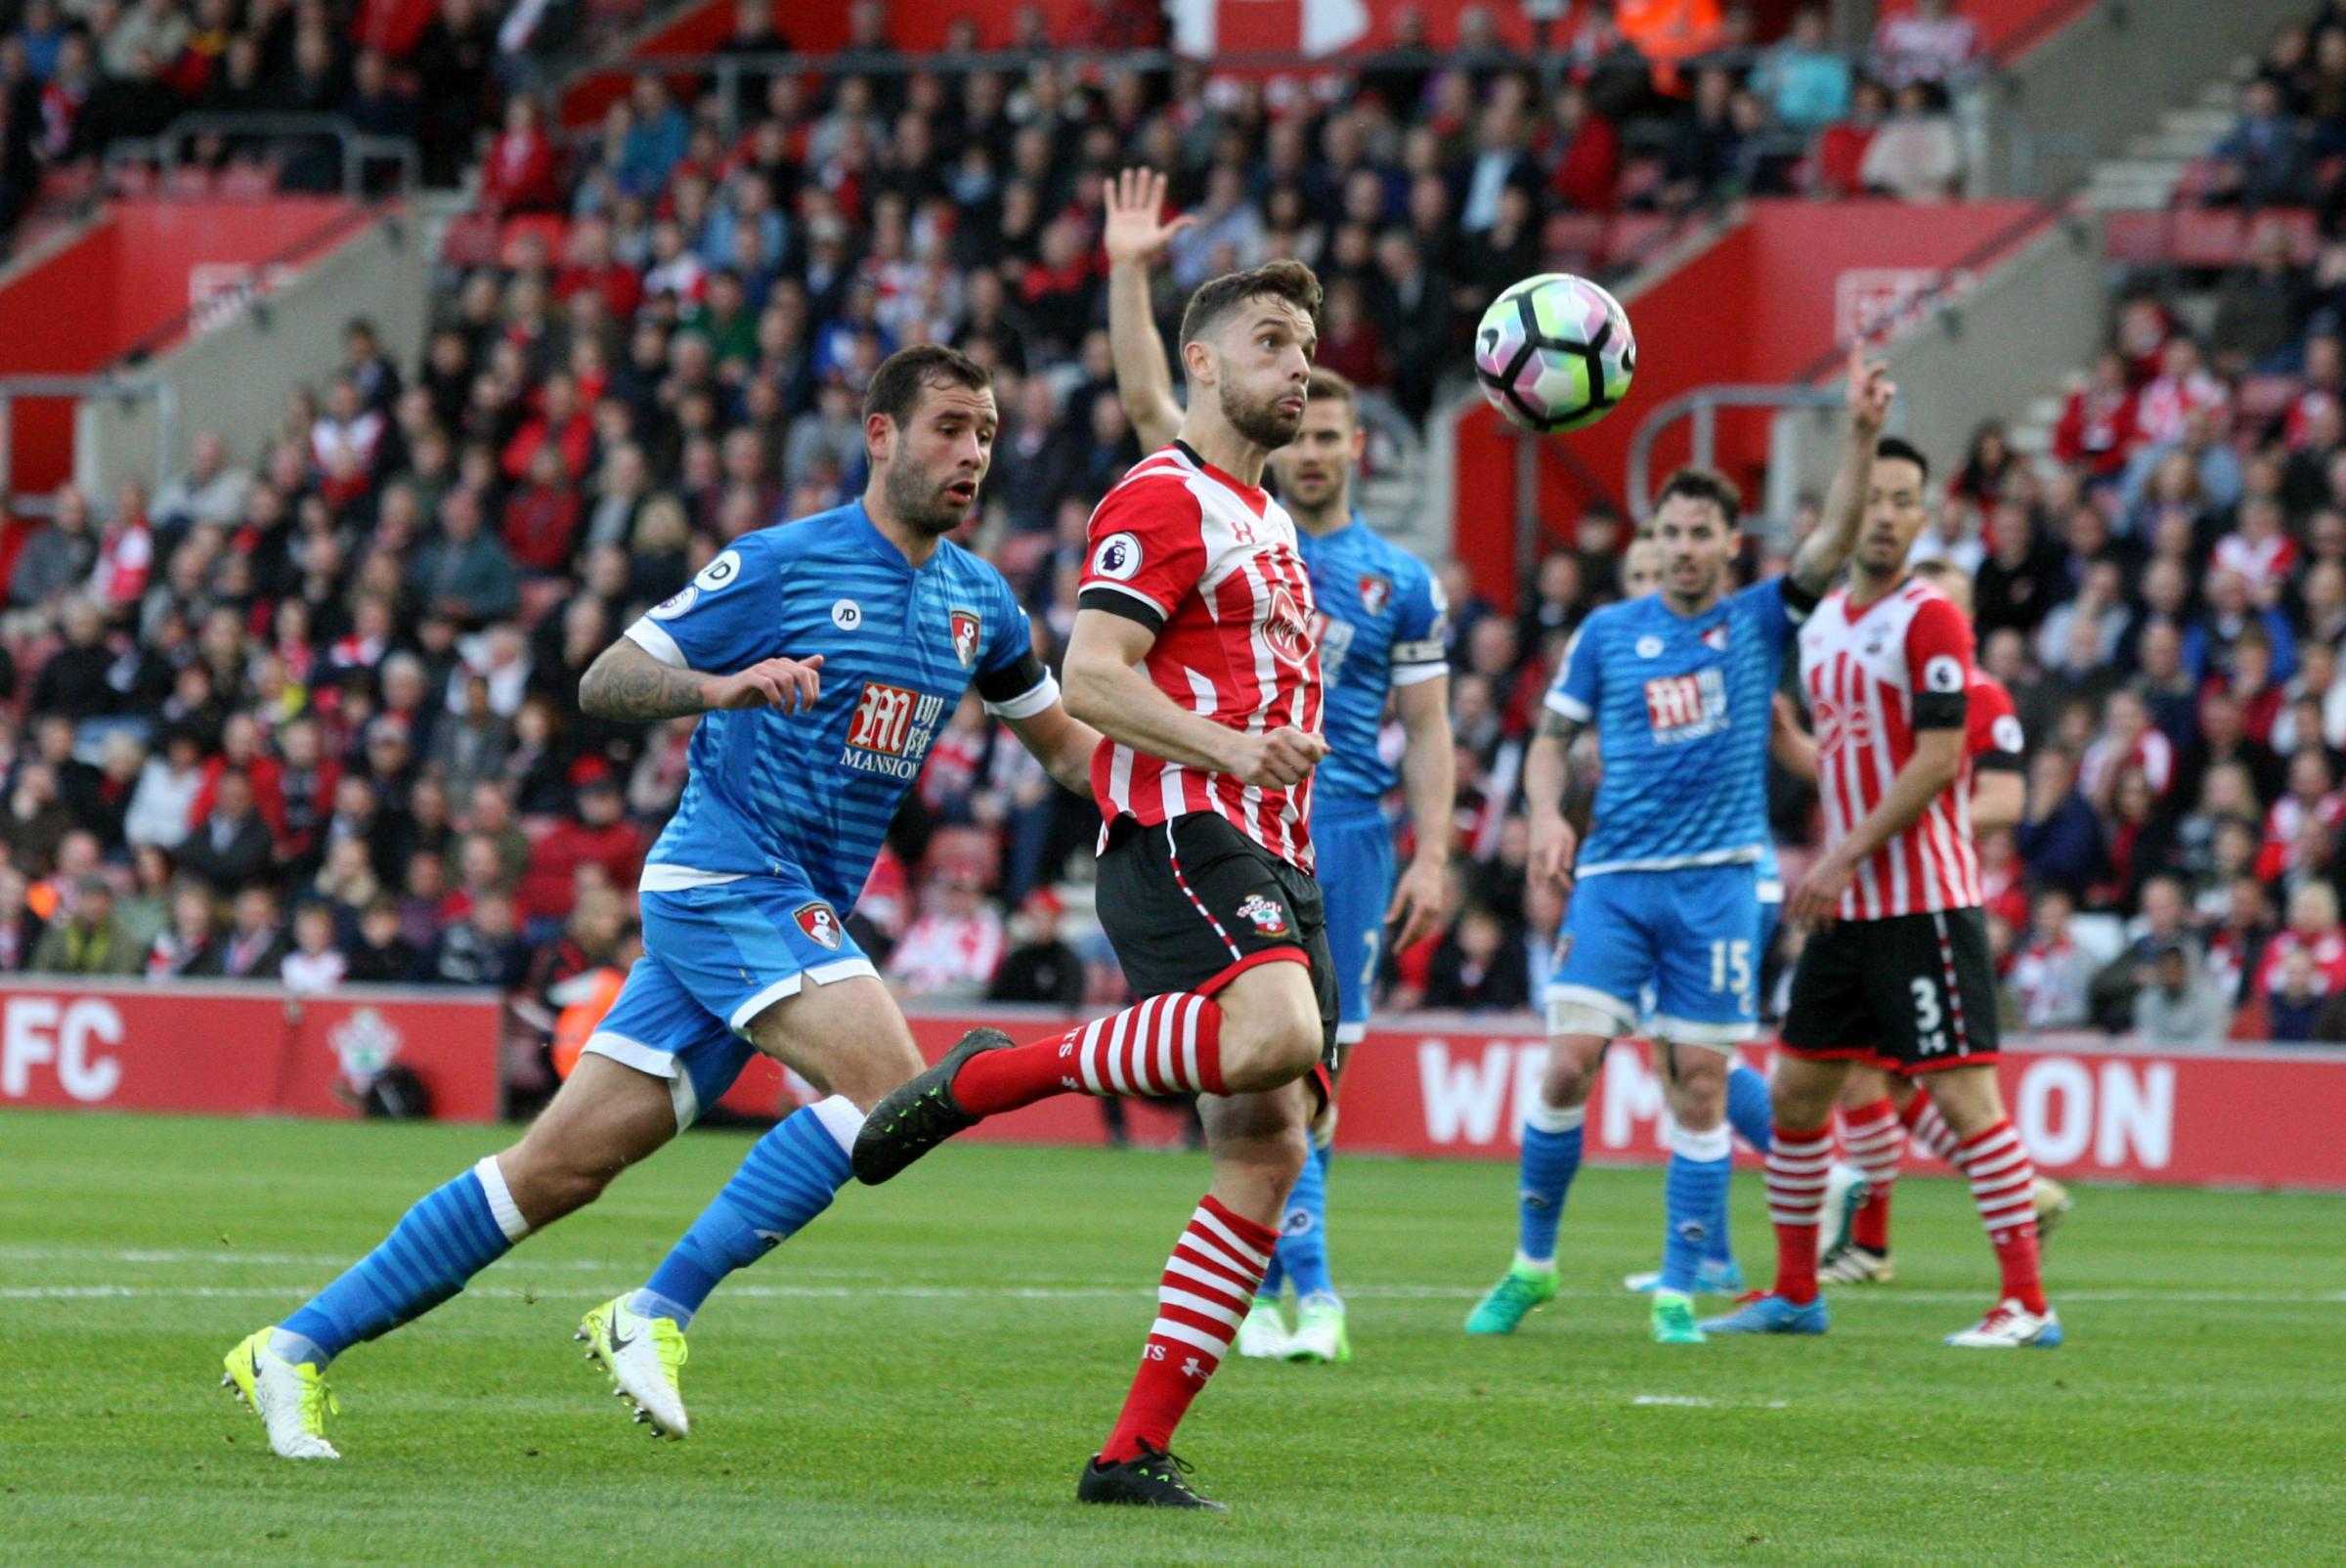 Southampton 0-0 AFC Bournemouth: Saints grateful for a missed penalty and a goal-line clearance